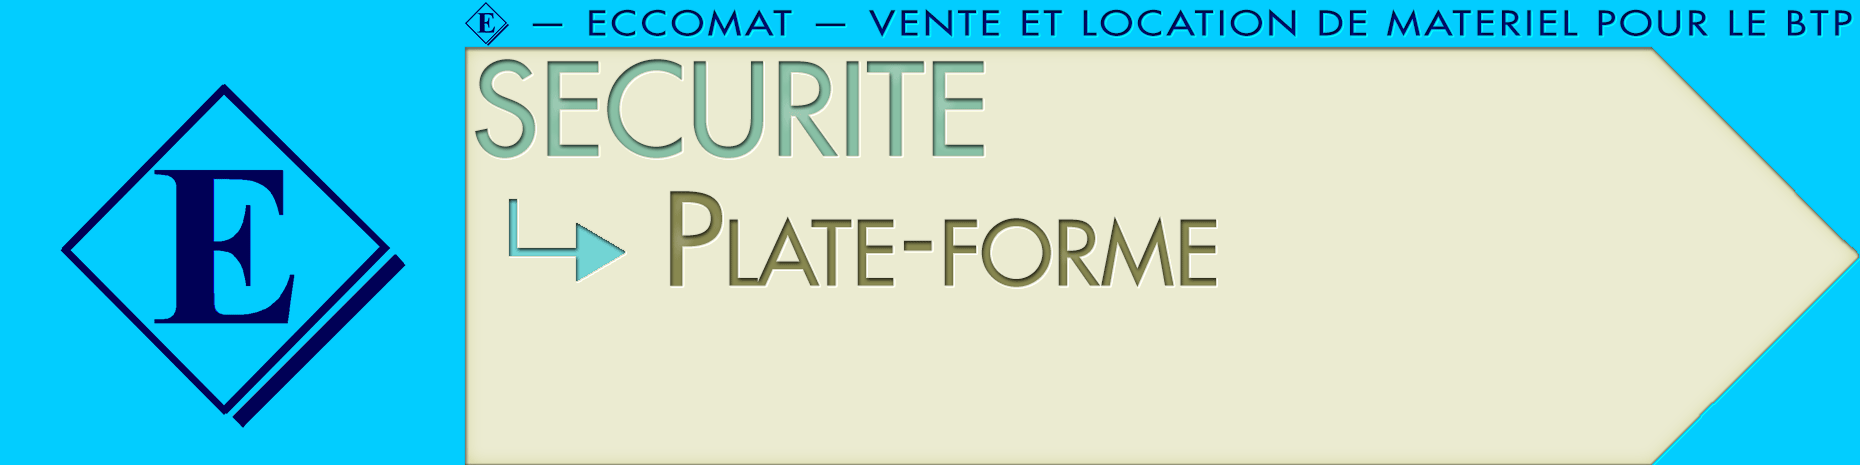 SOUS-DOSSIER-PLATE-FORME